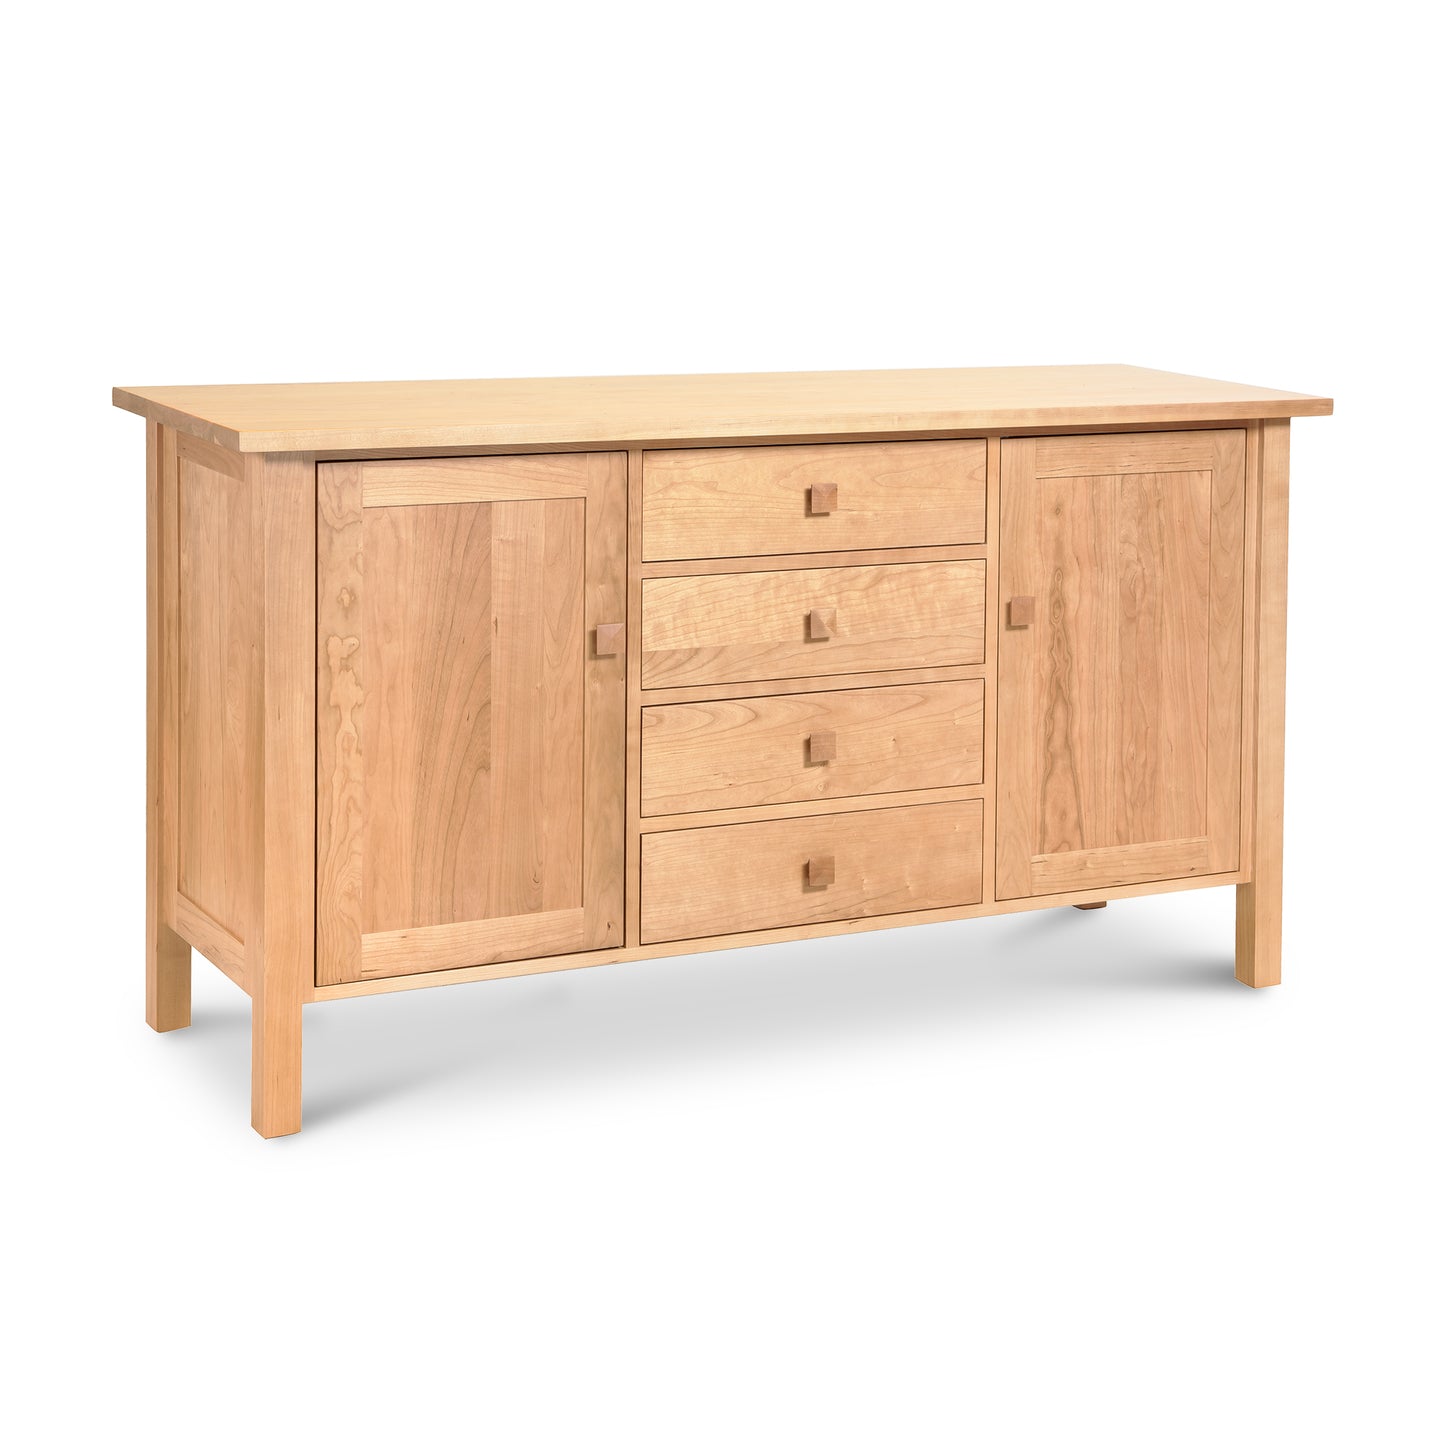 A Modern Mission Sideboard with handmade wooden drawers by Lyndon Furniture.